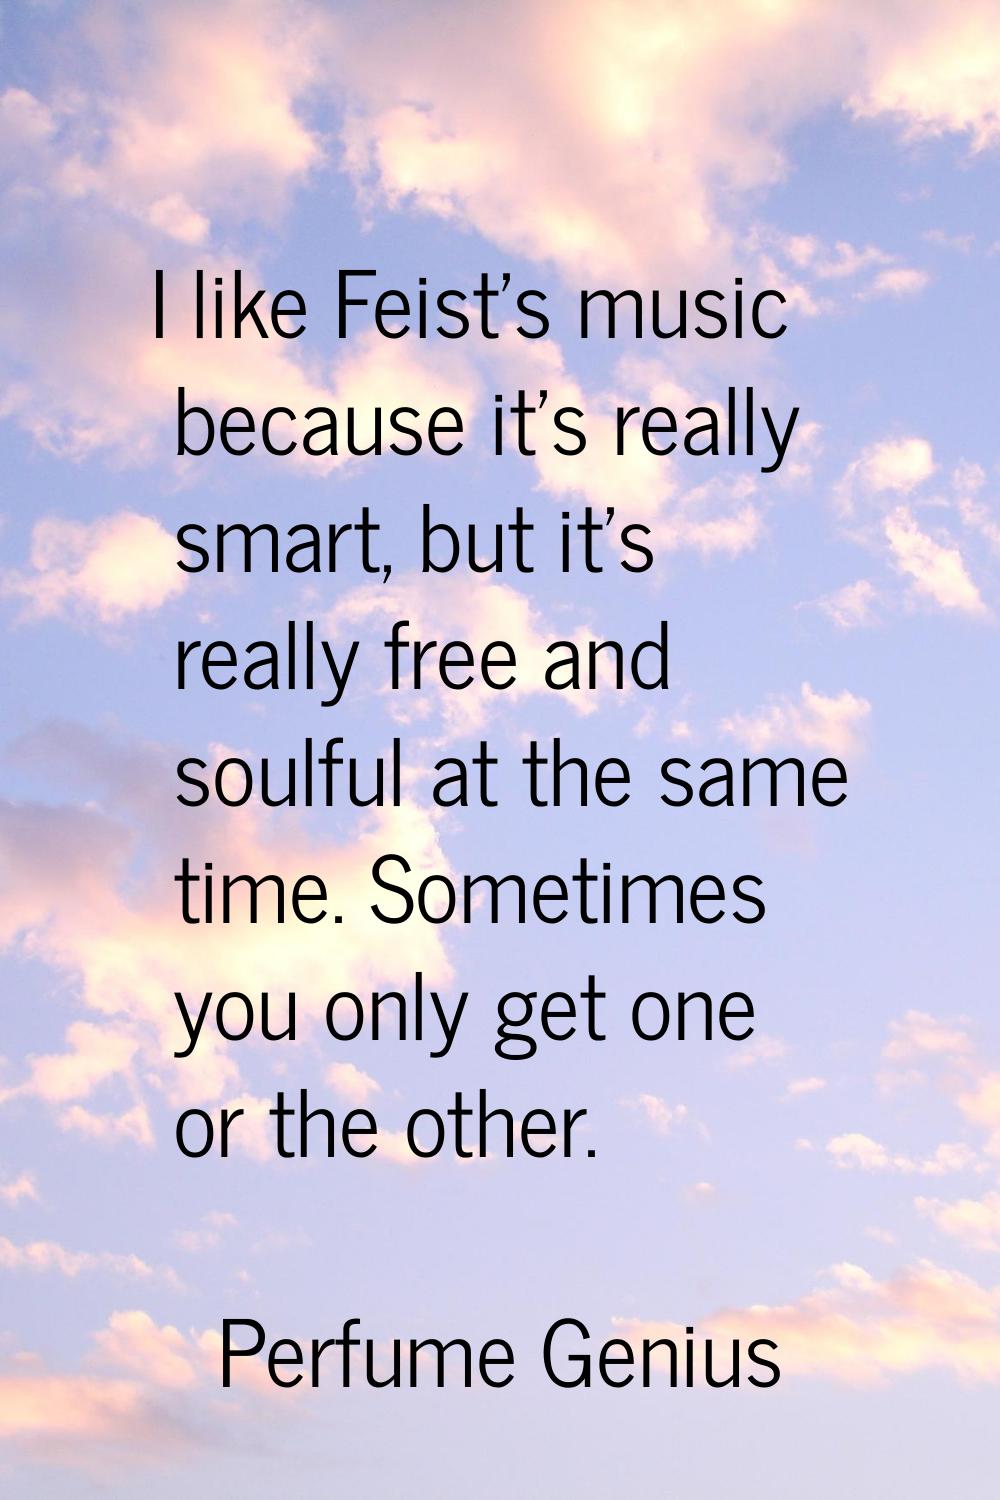 I like Feist's music because it's really smart, but it's really free and soulful at the same time. 